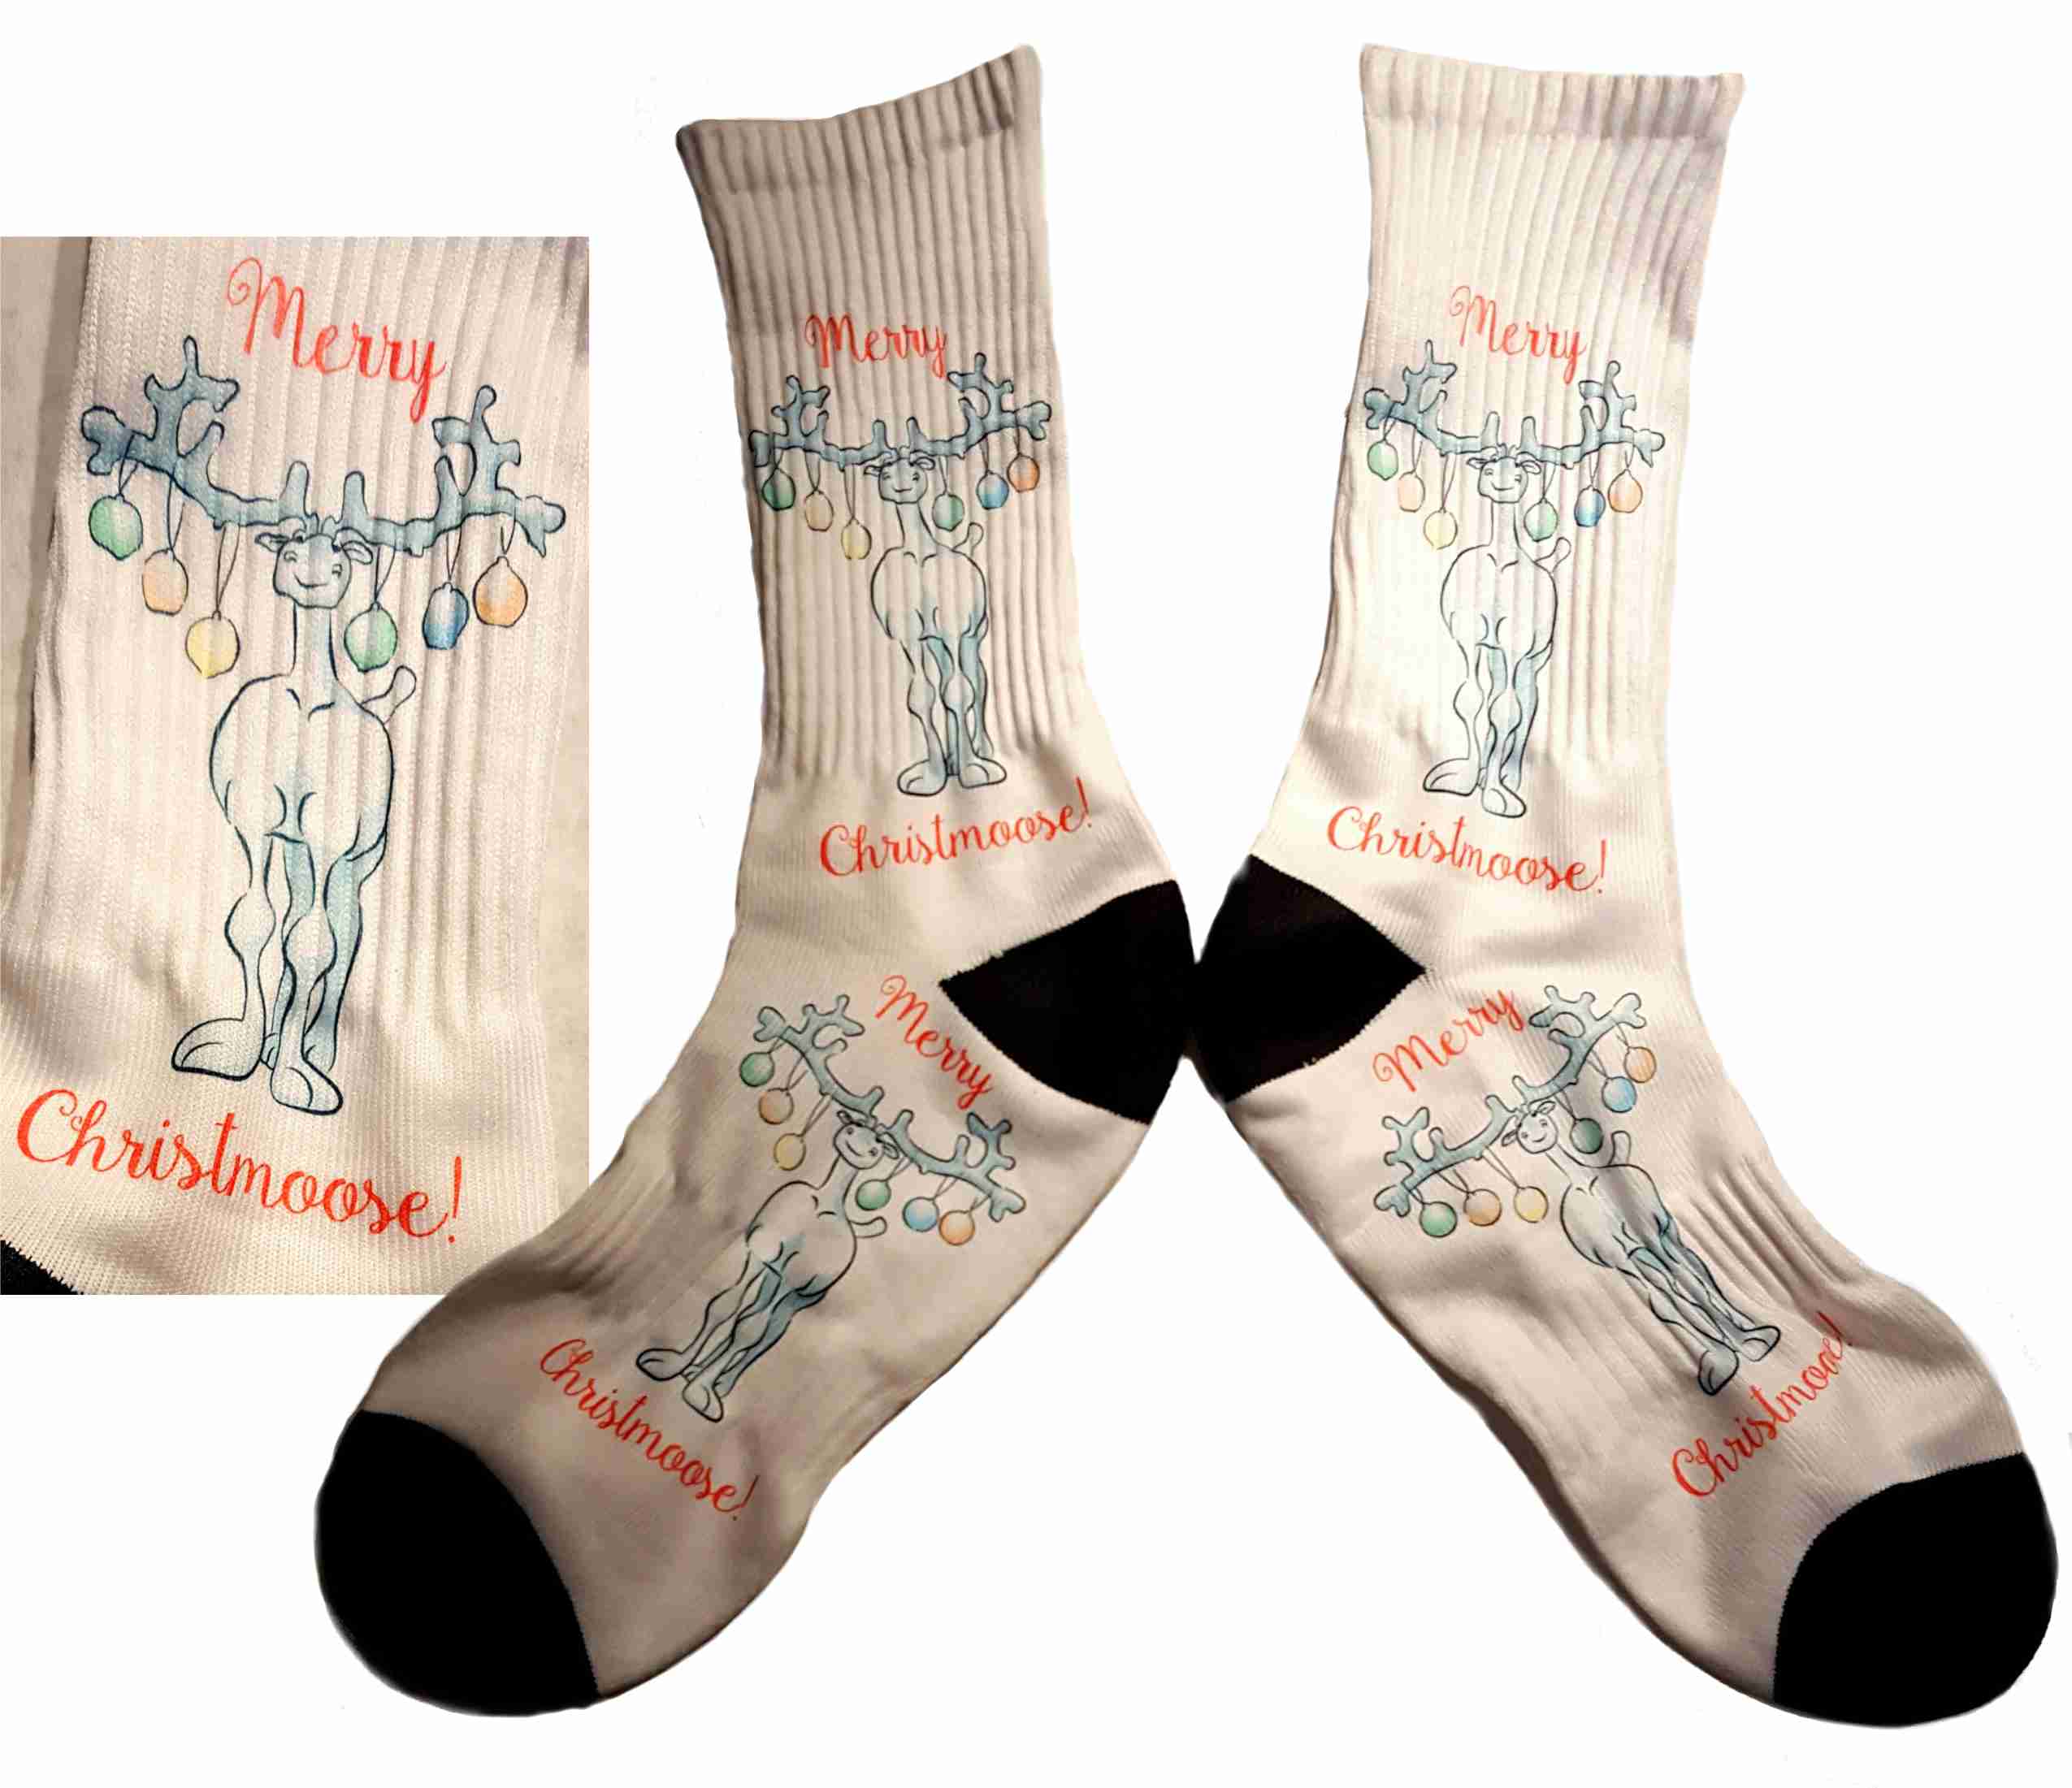 Merry Christmoose Socks made with sublimation printing